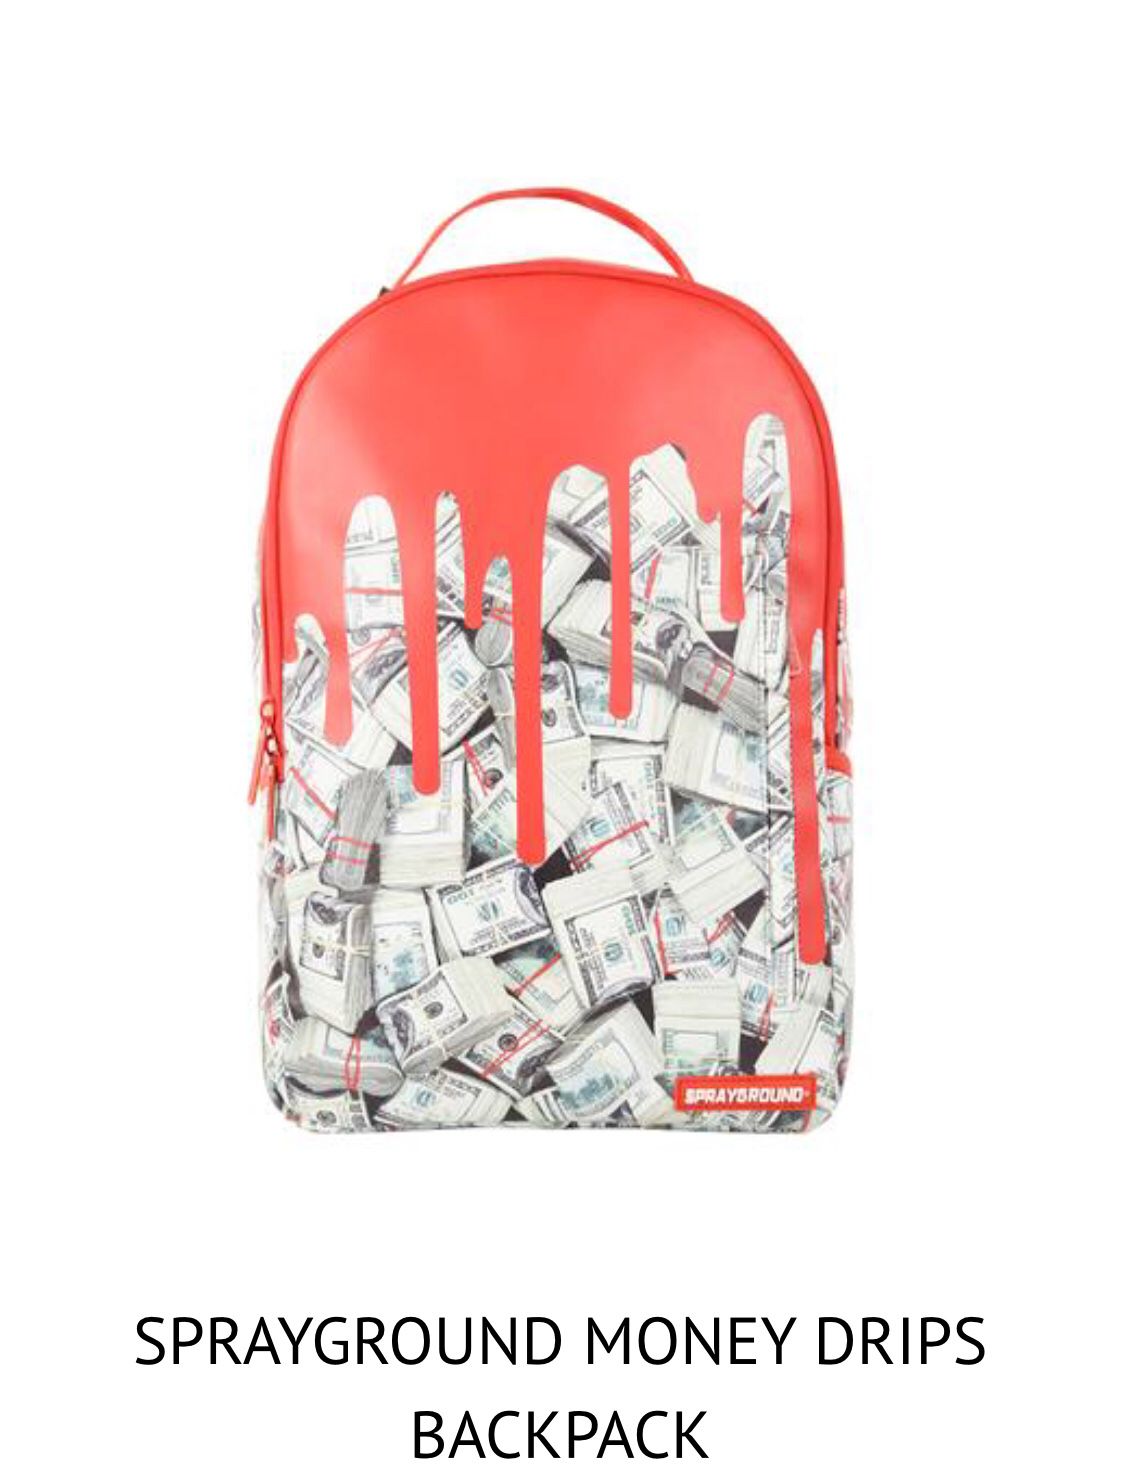 Sprayground backpack money drips Red for Sale in Rockville Centre